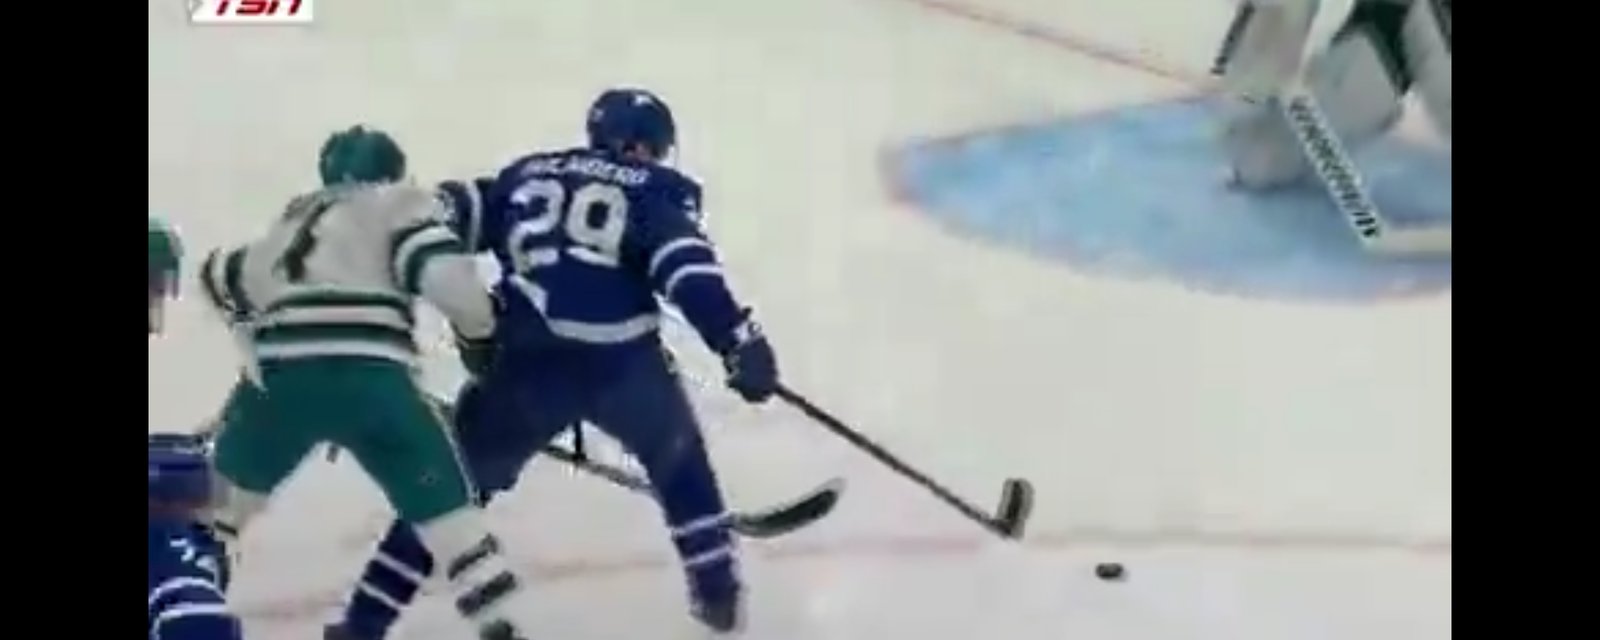 Pontus Holmberg scores filthy one-handed goal